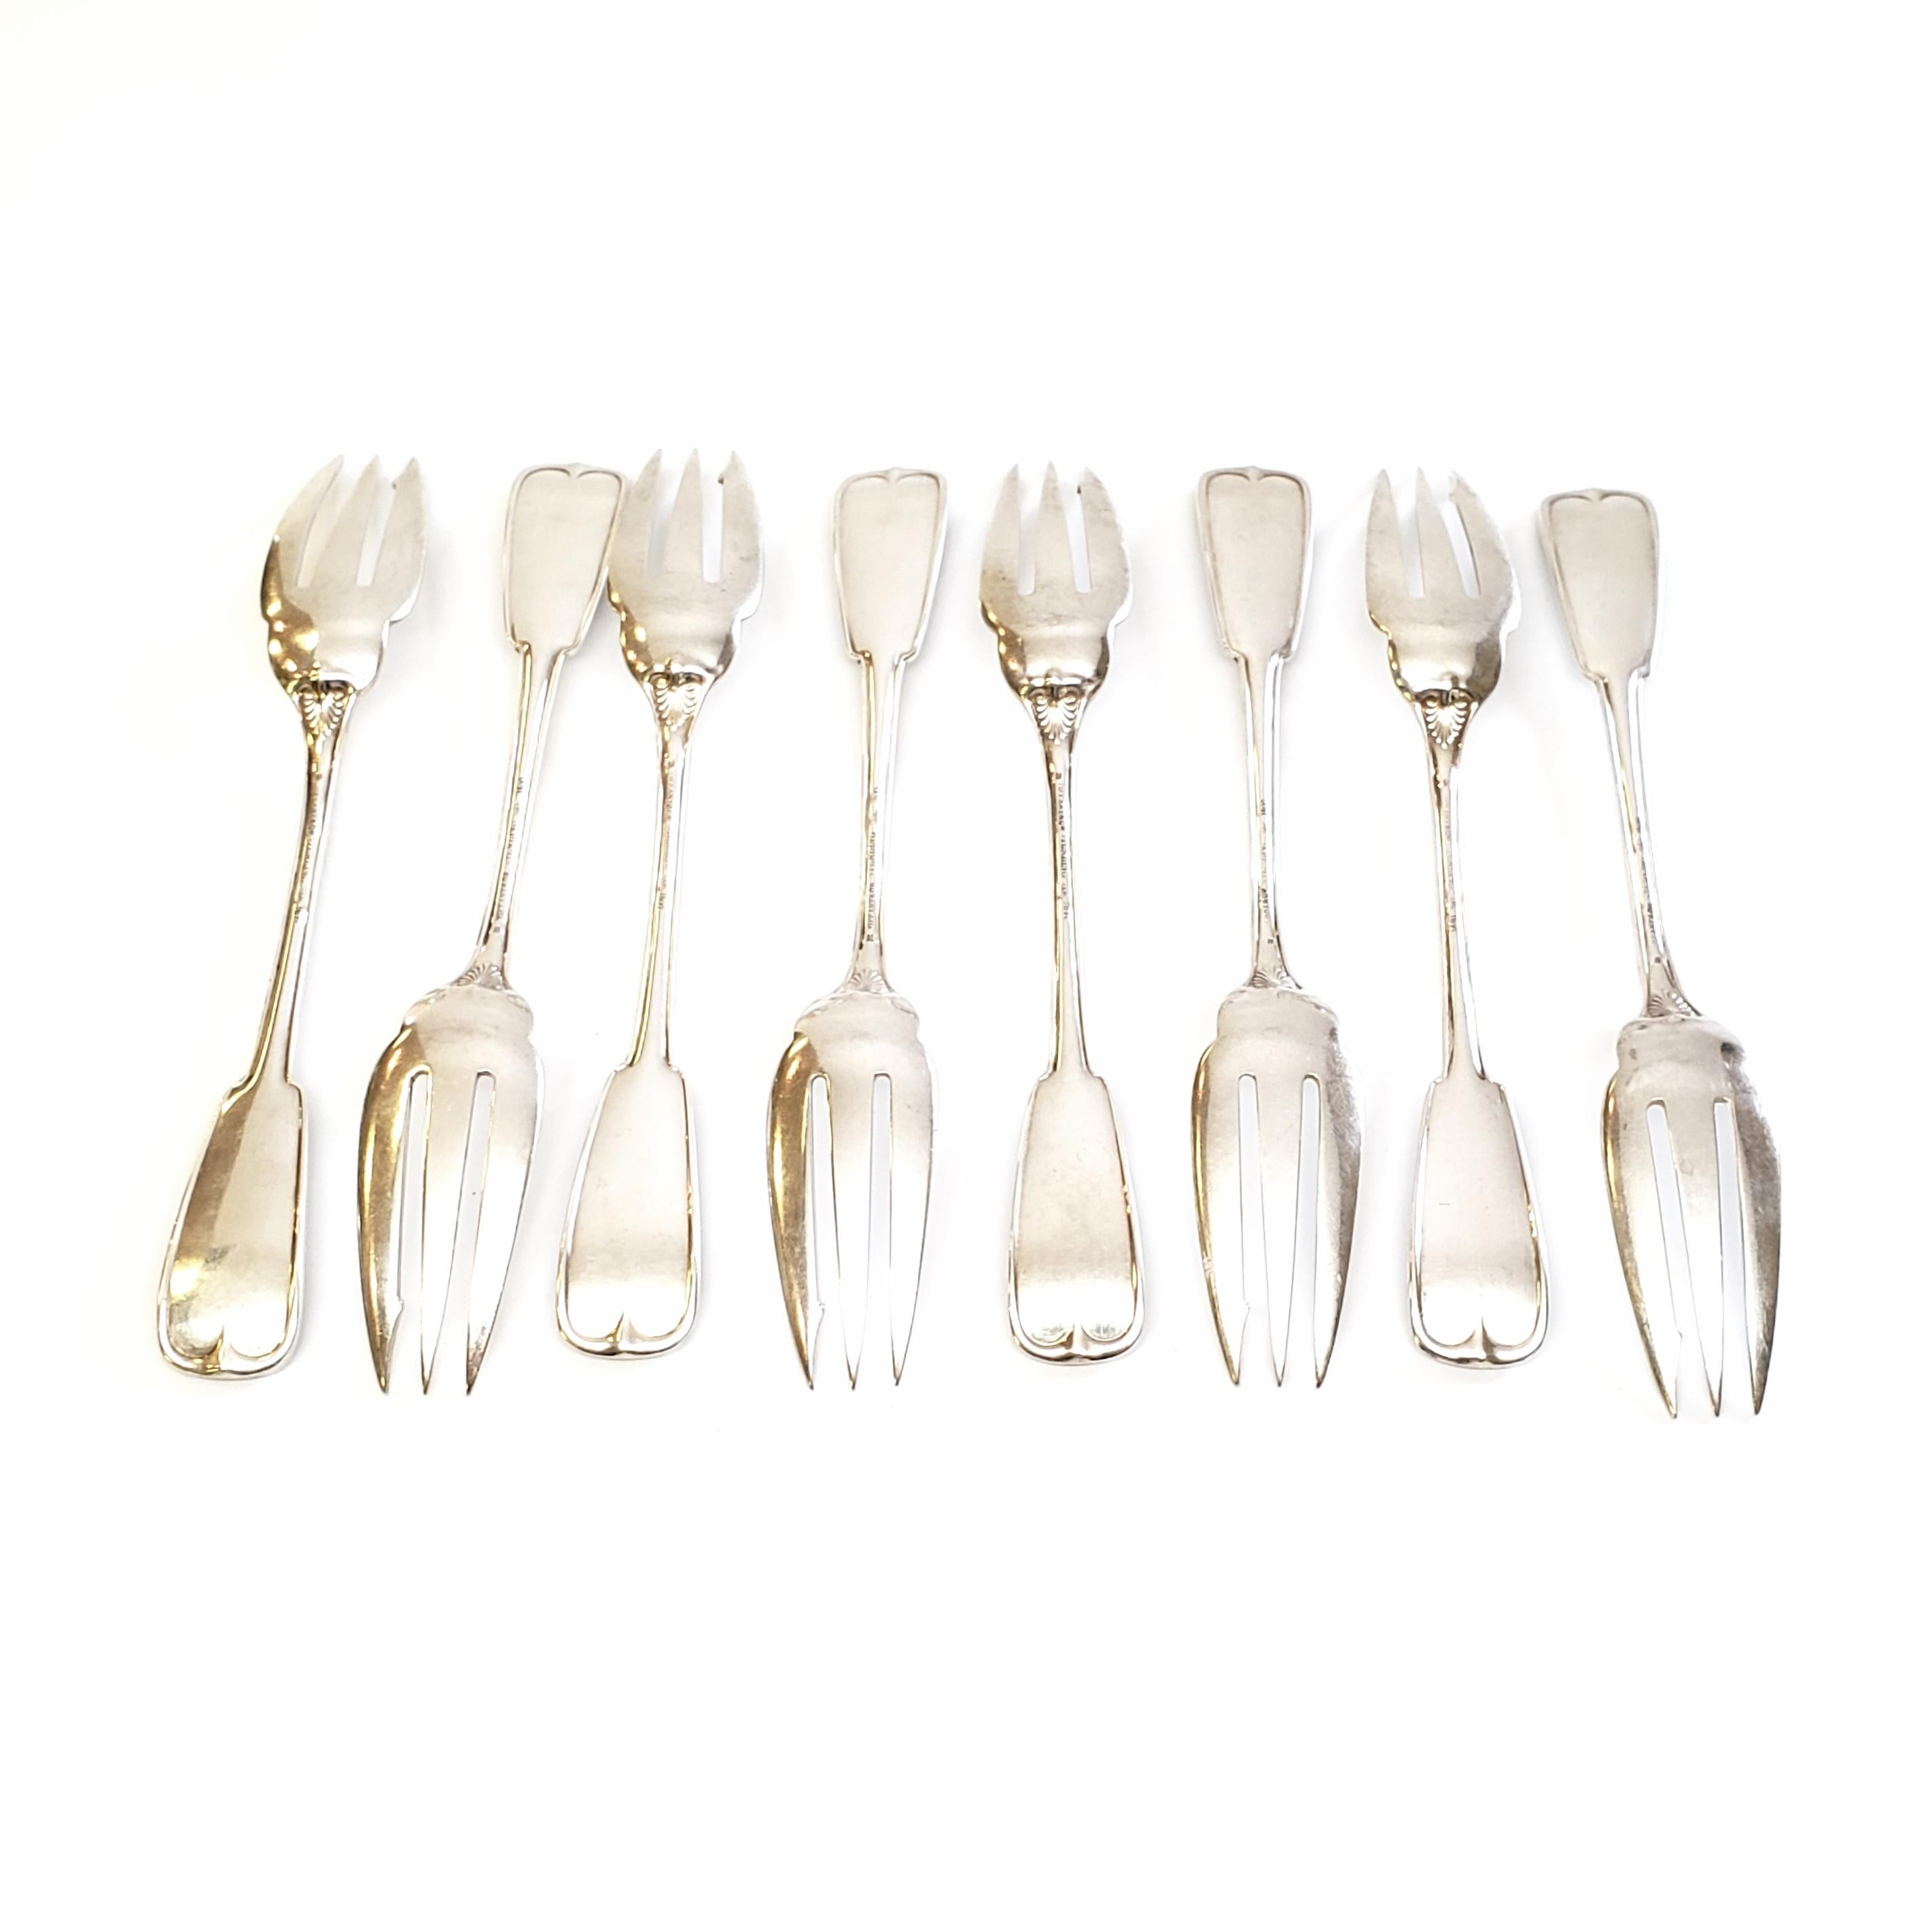 Set of 8 antique sterling silver pie forks by Tiffany & Co. in the Palm pattern.

The Palm pattern was designed by Edward C. Moore and introduced in 1871. It is a simple and elegant pattern inspired by the natural world. These pie forks feature 1